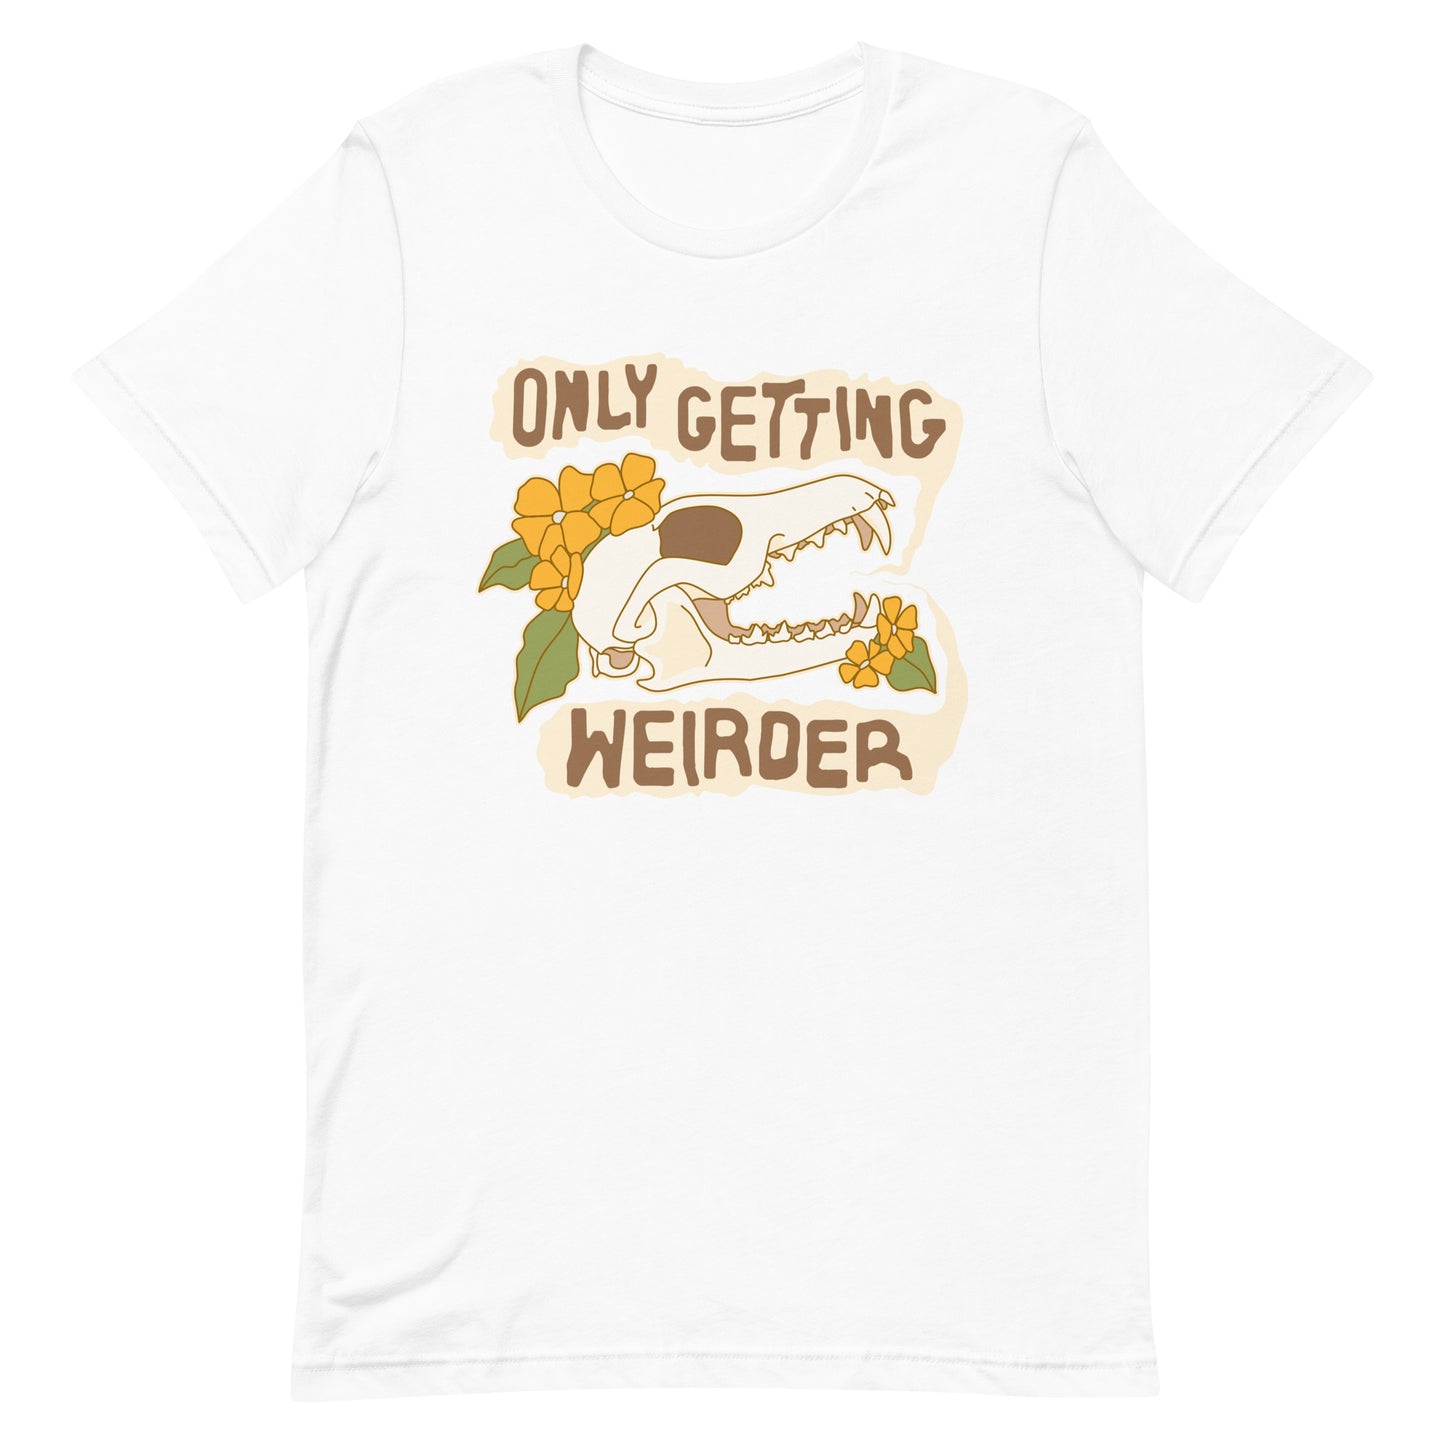 A white t-shirt featuirng an illustration of a fox skull surrounded by yellow flowers. Wobbly speech bubbles are coming from the fox's mouth. Text inside the bubbles reads "ONLY GETTING WEIRDER'.